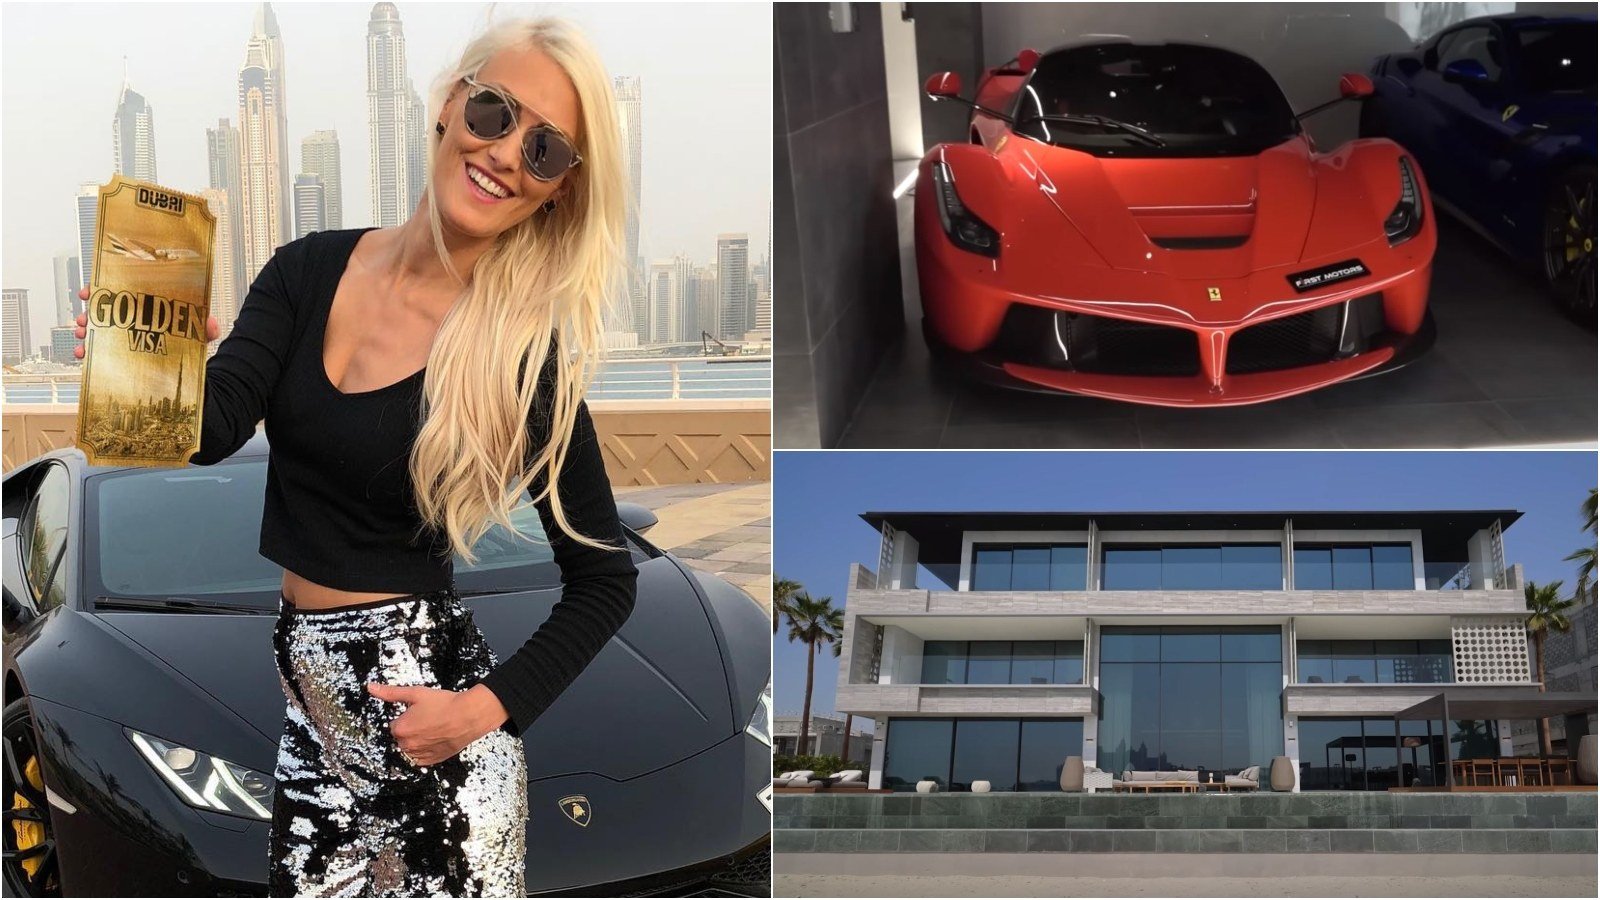 Alex Hirschi, aka Supercar Blondie, just made a startling discovery in a mansion in Dubai. Photos: @supercarblondie/Instagram, Supercar Blondie/YouTube